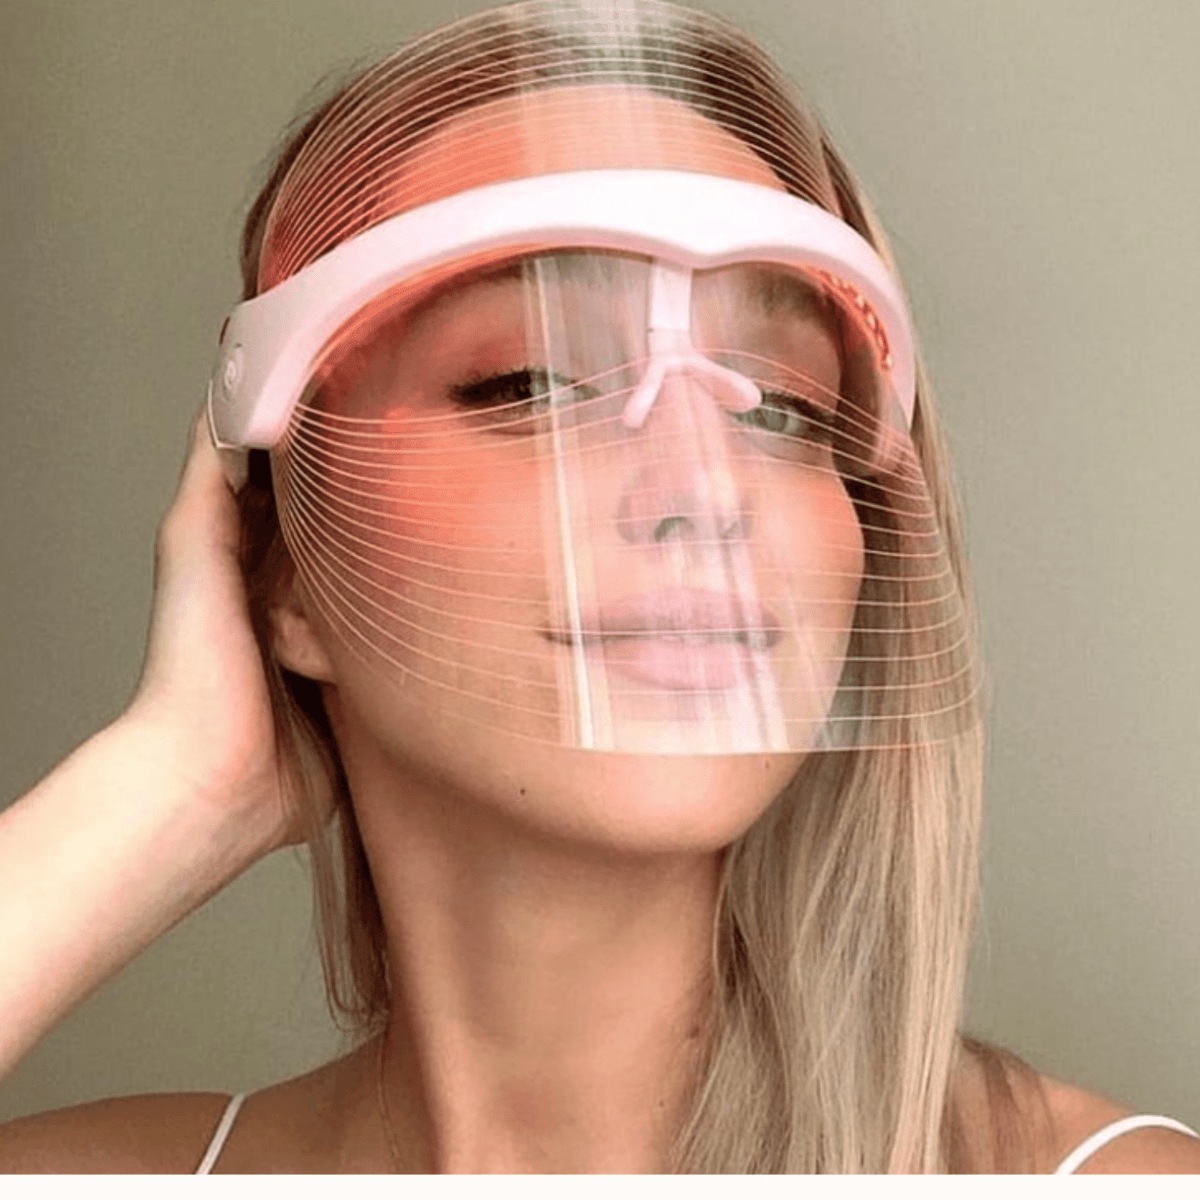 Women wearing the LED therapy mask with redlight turned on 